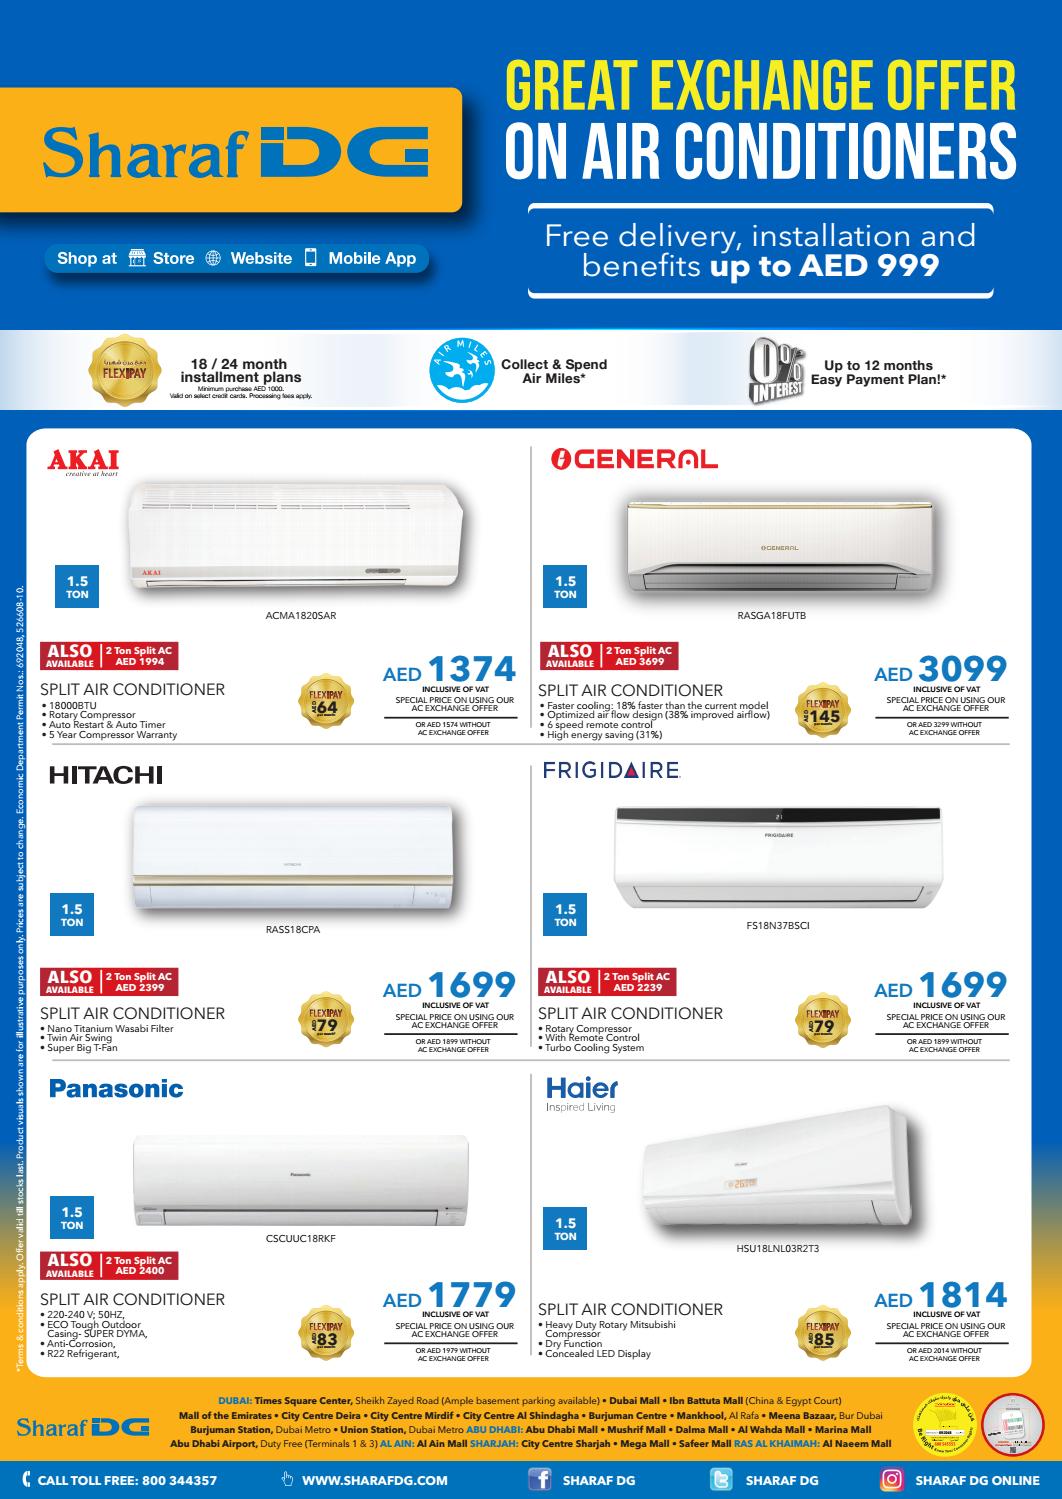 Air Conditioners Offers With Exchange Deals in Sharaf DG